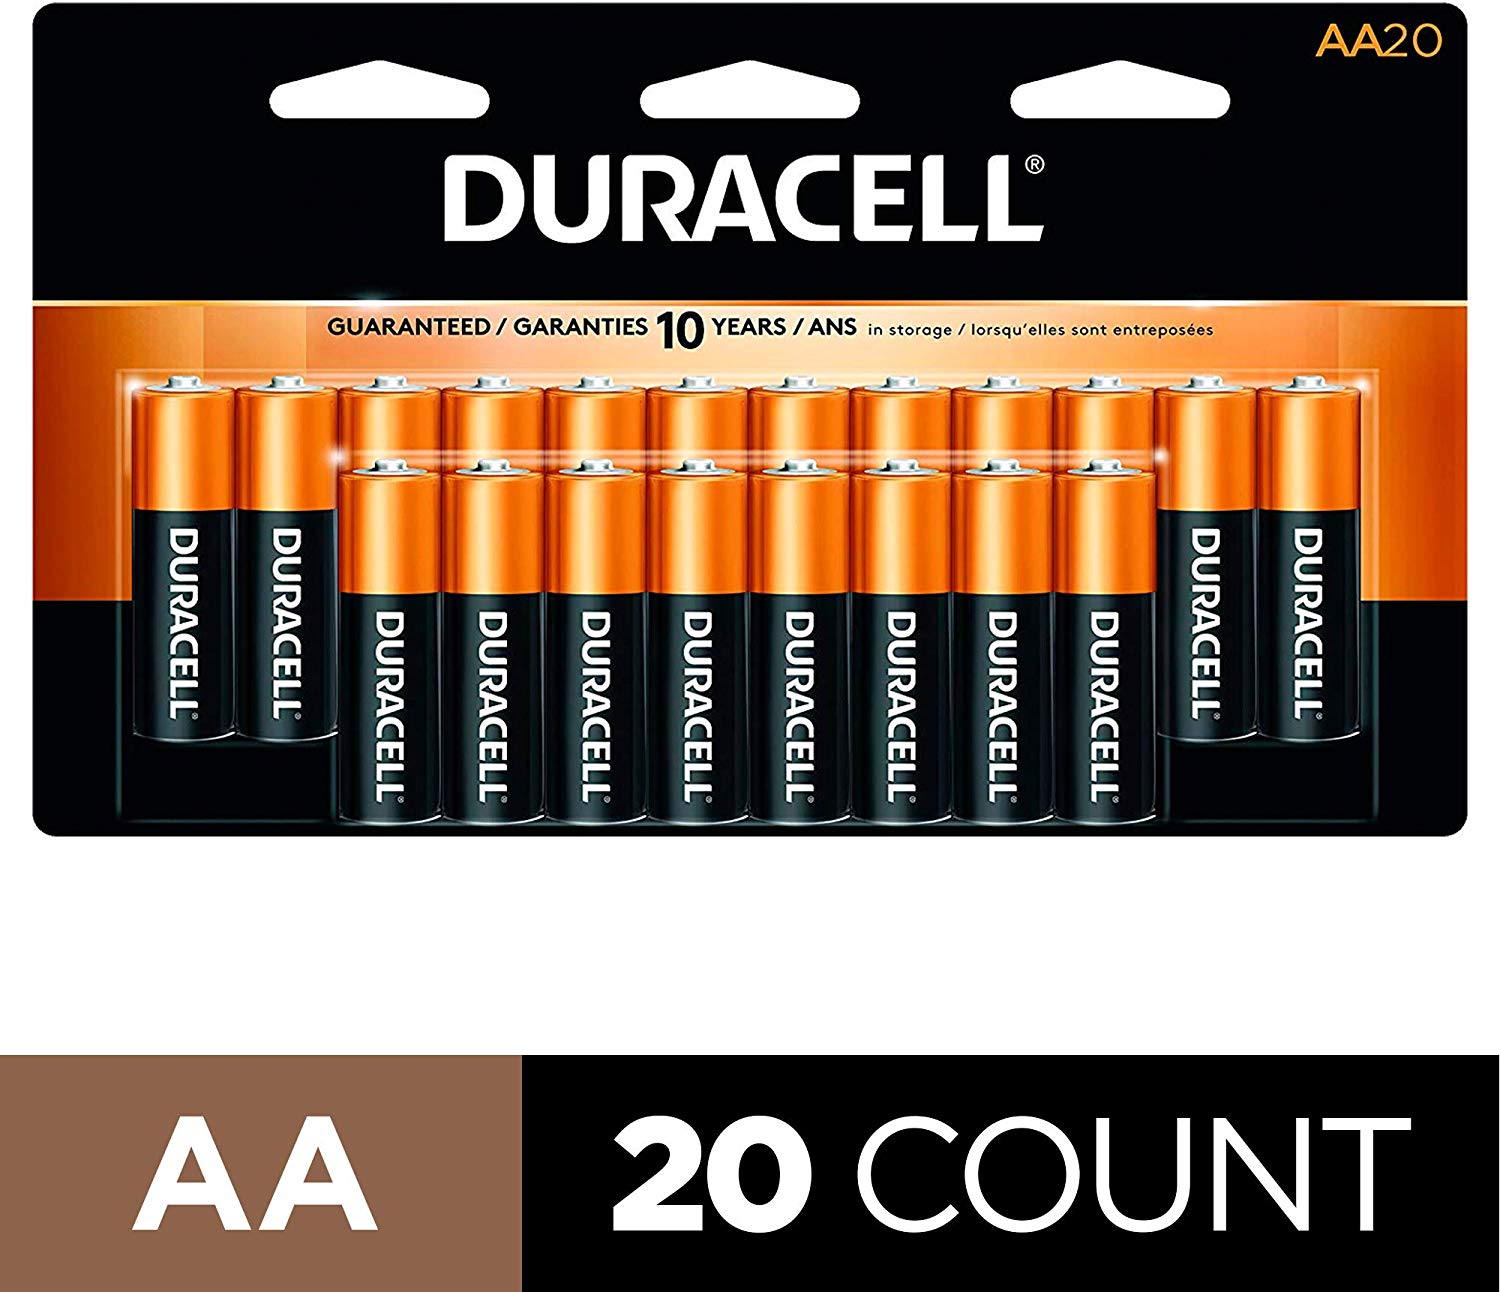 duracell rechargeable batteries instructions